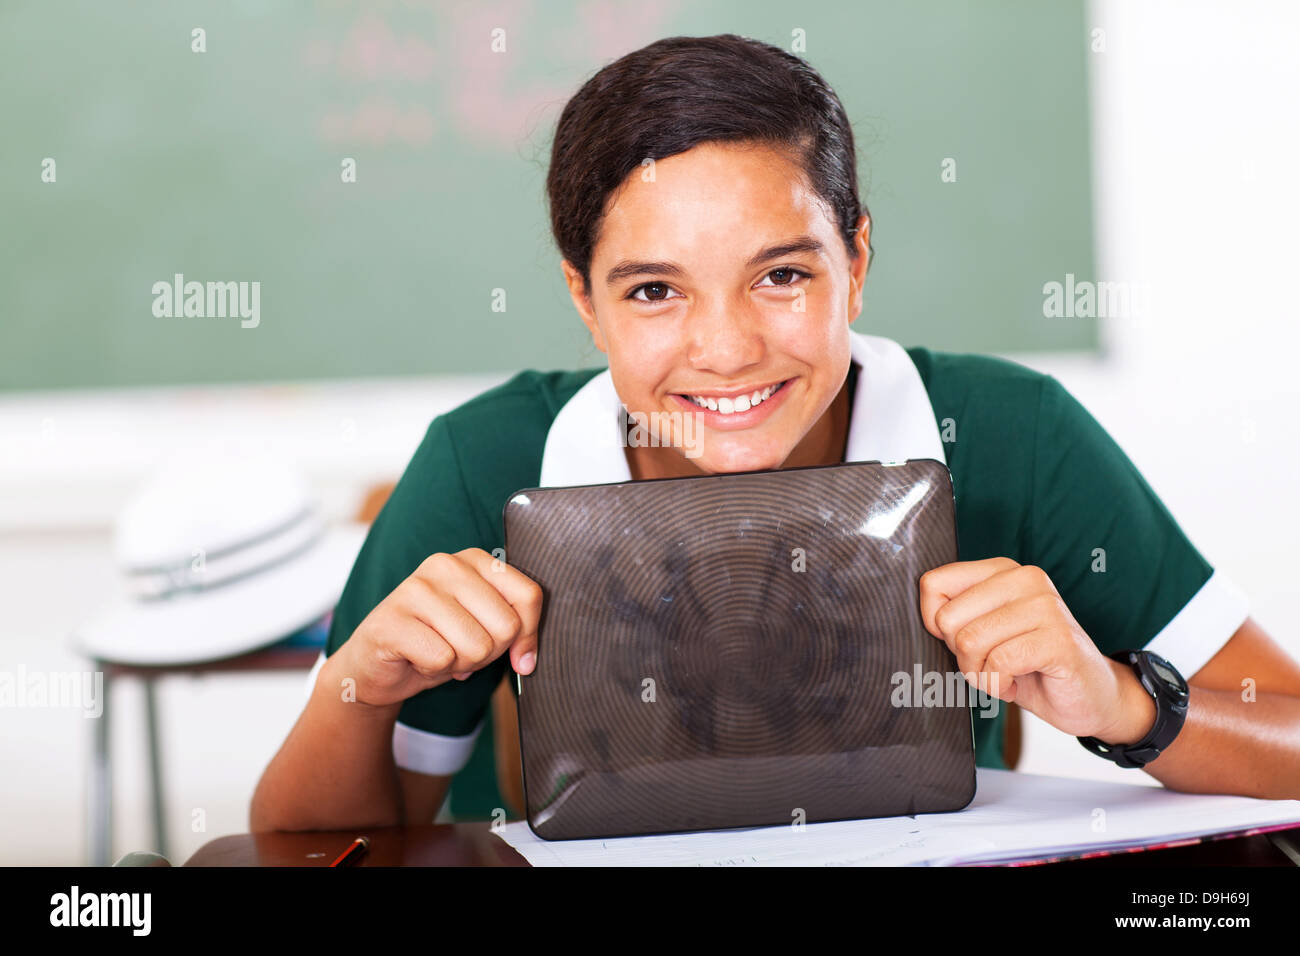 happy high school girl holding tablet computer Stock Photo